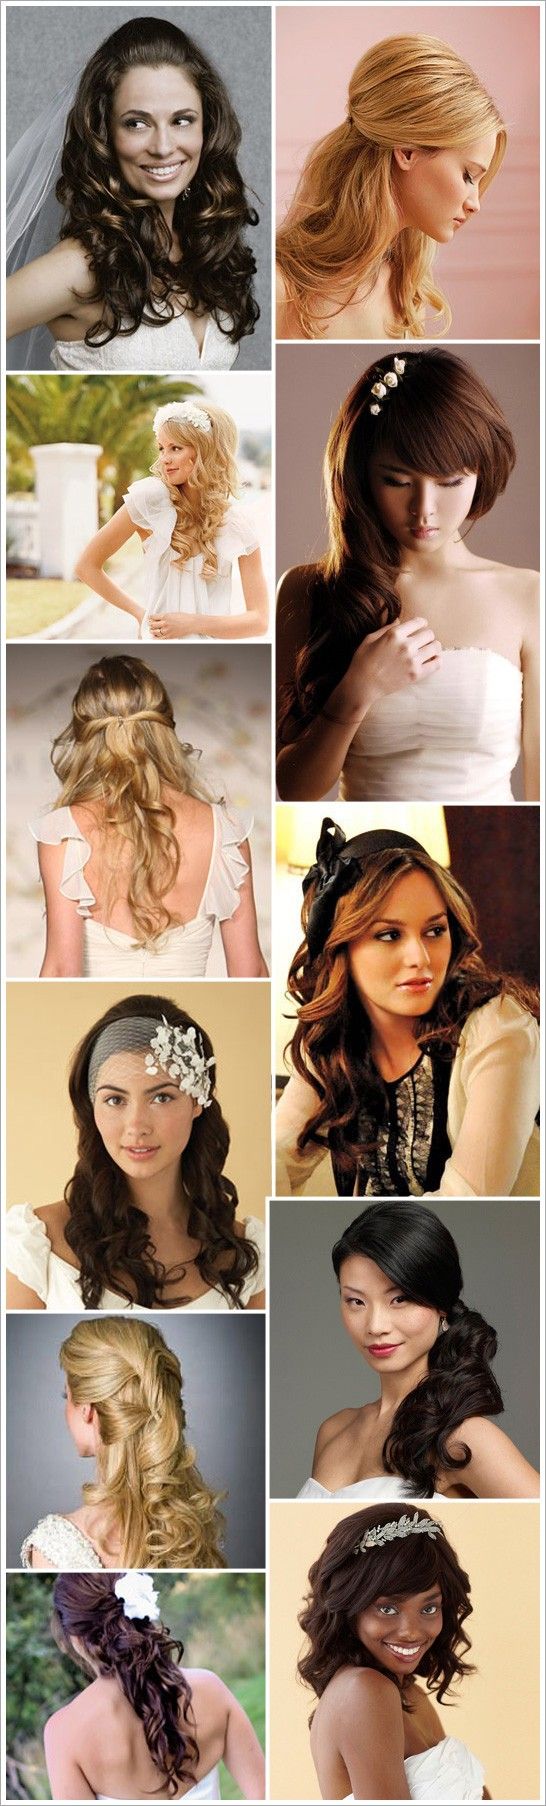 Soft, Swooping, & Feminine Styles for Long Hair. Now if only I had a clue ho